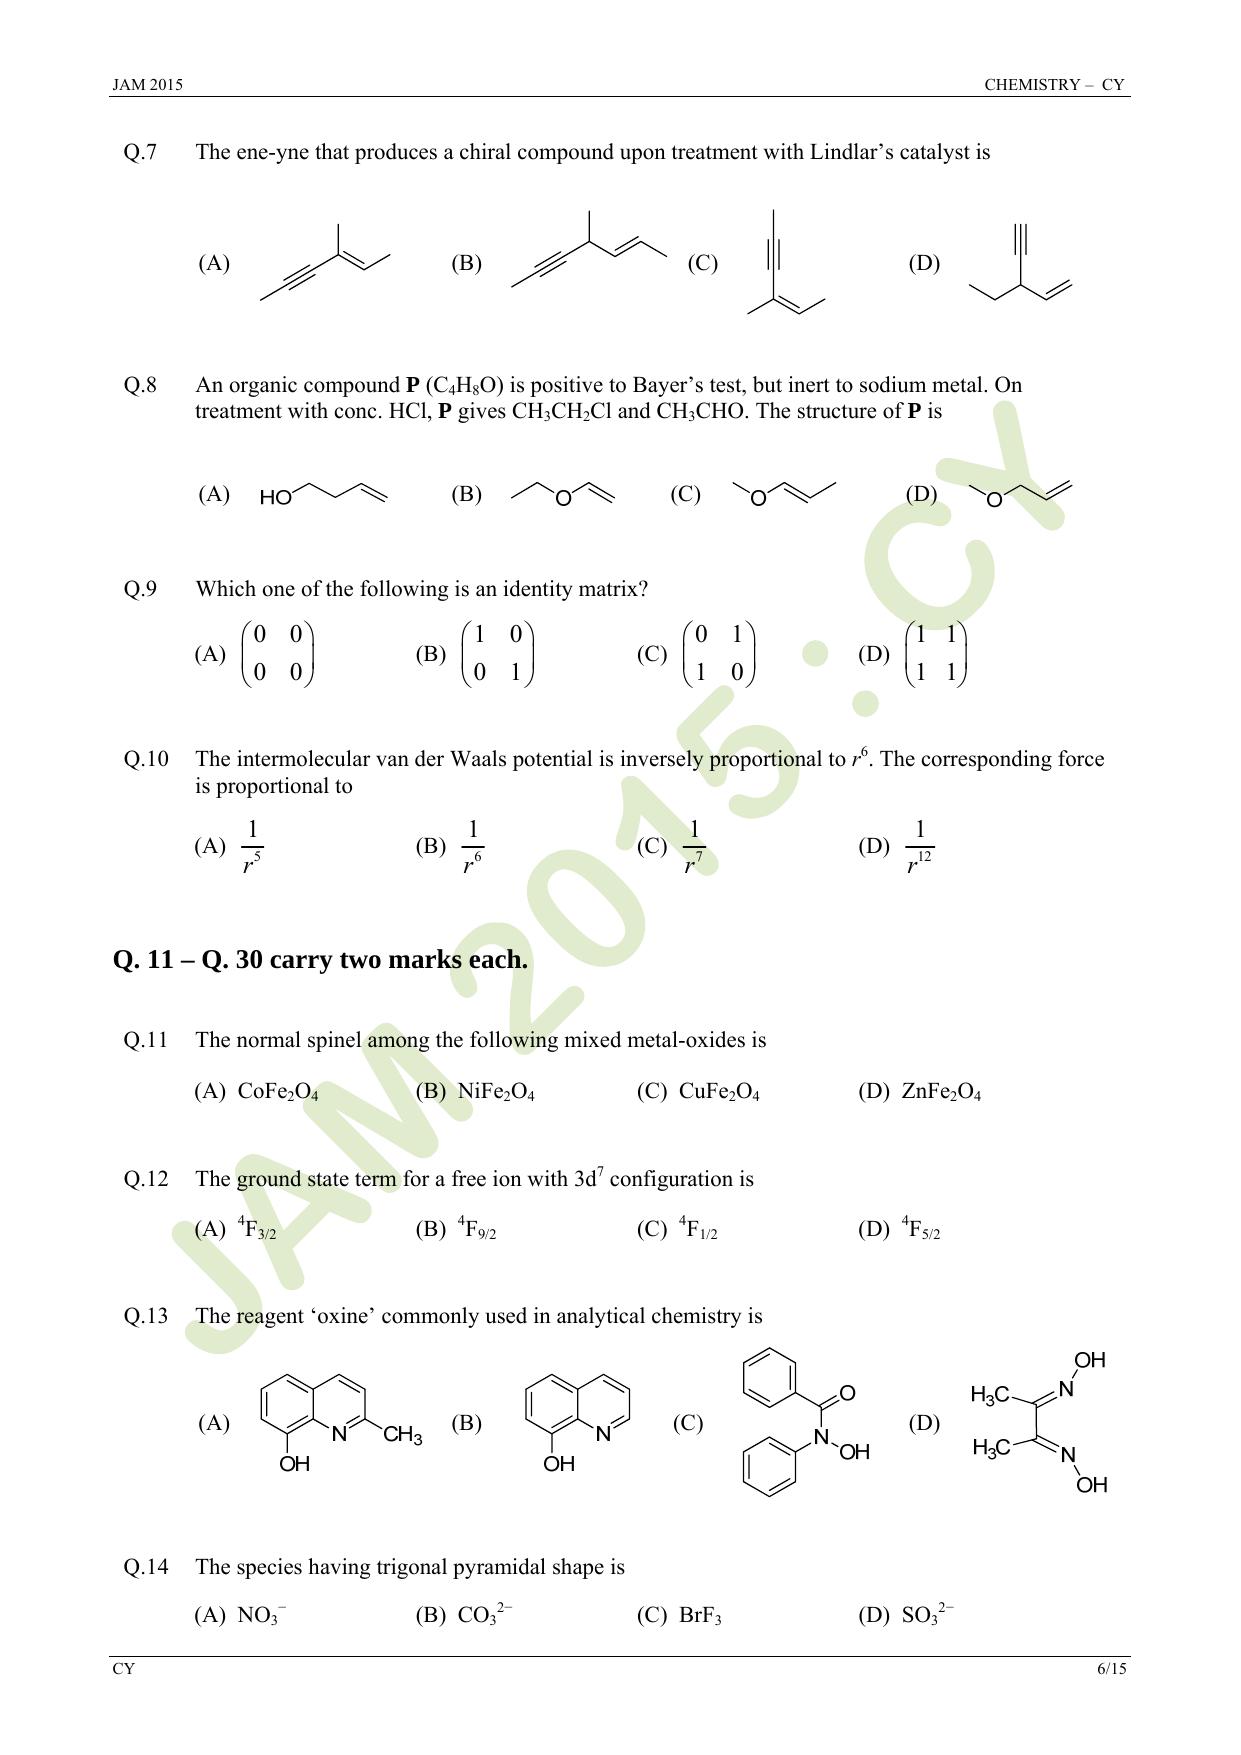 JAM 2015: CY Question Paper - Page 6